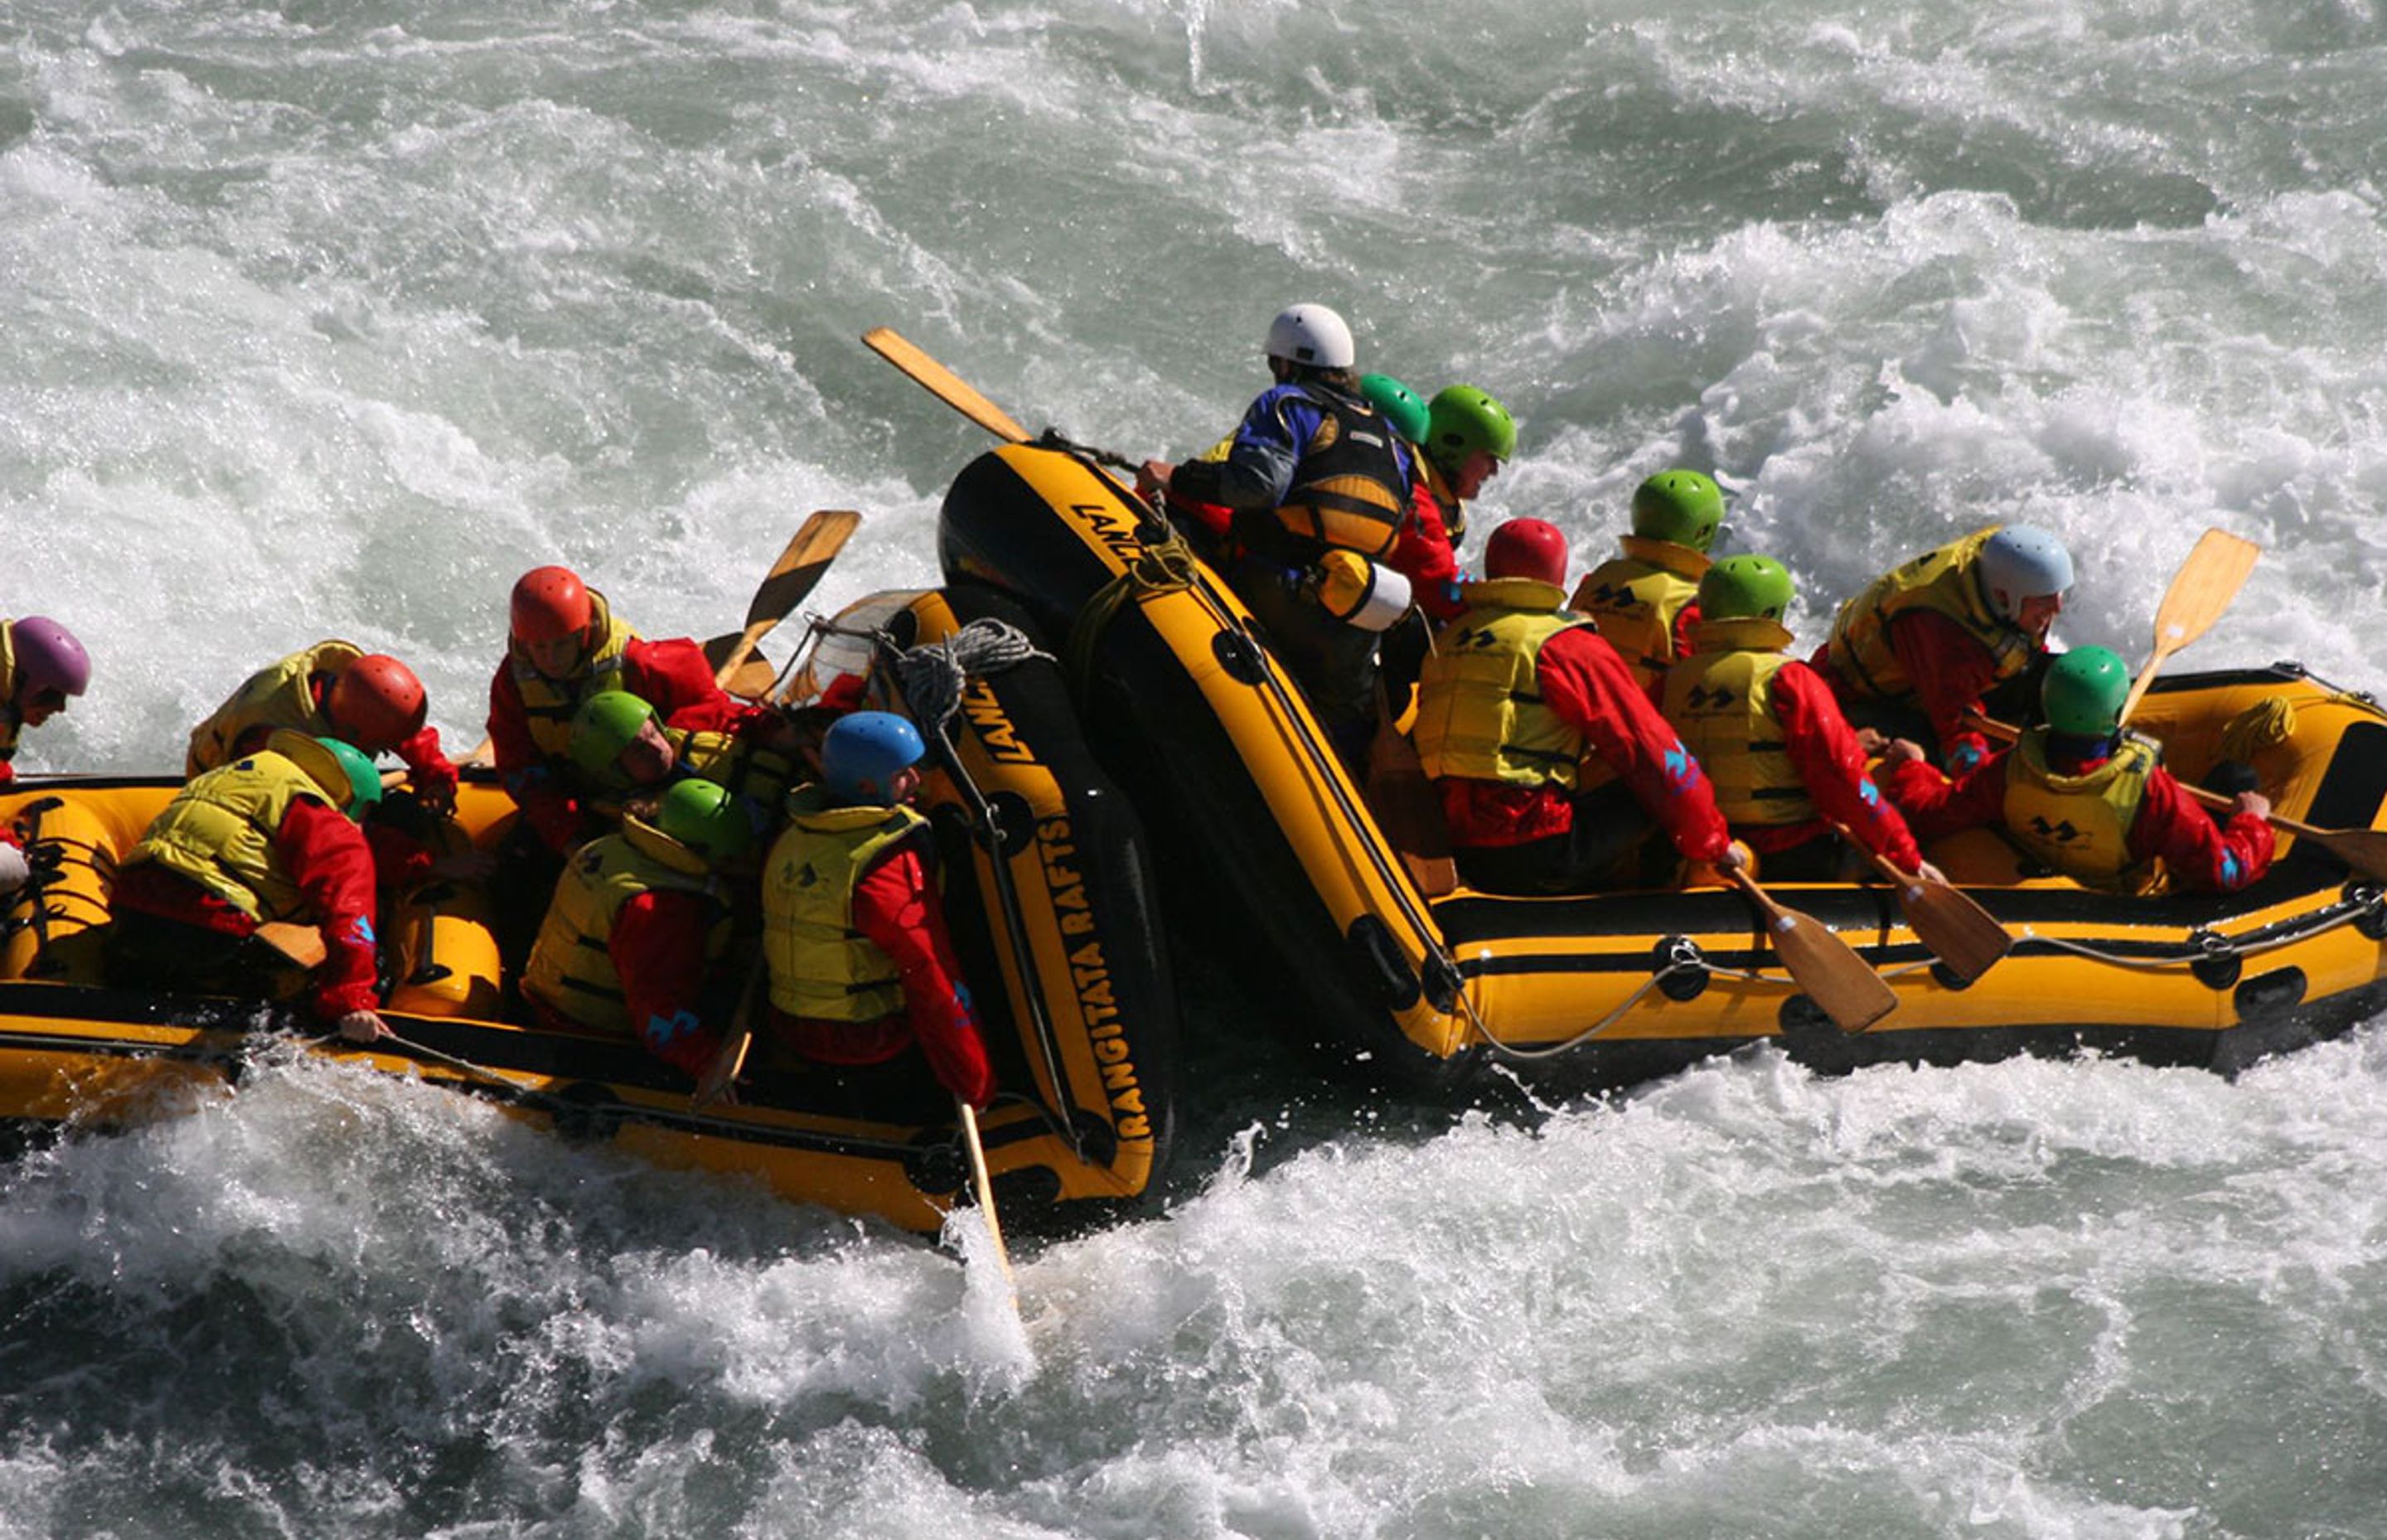 Friends River rafting Iceland in a crazy water